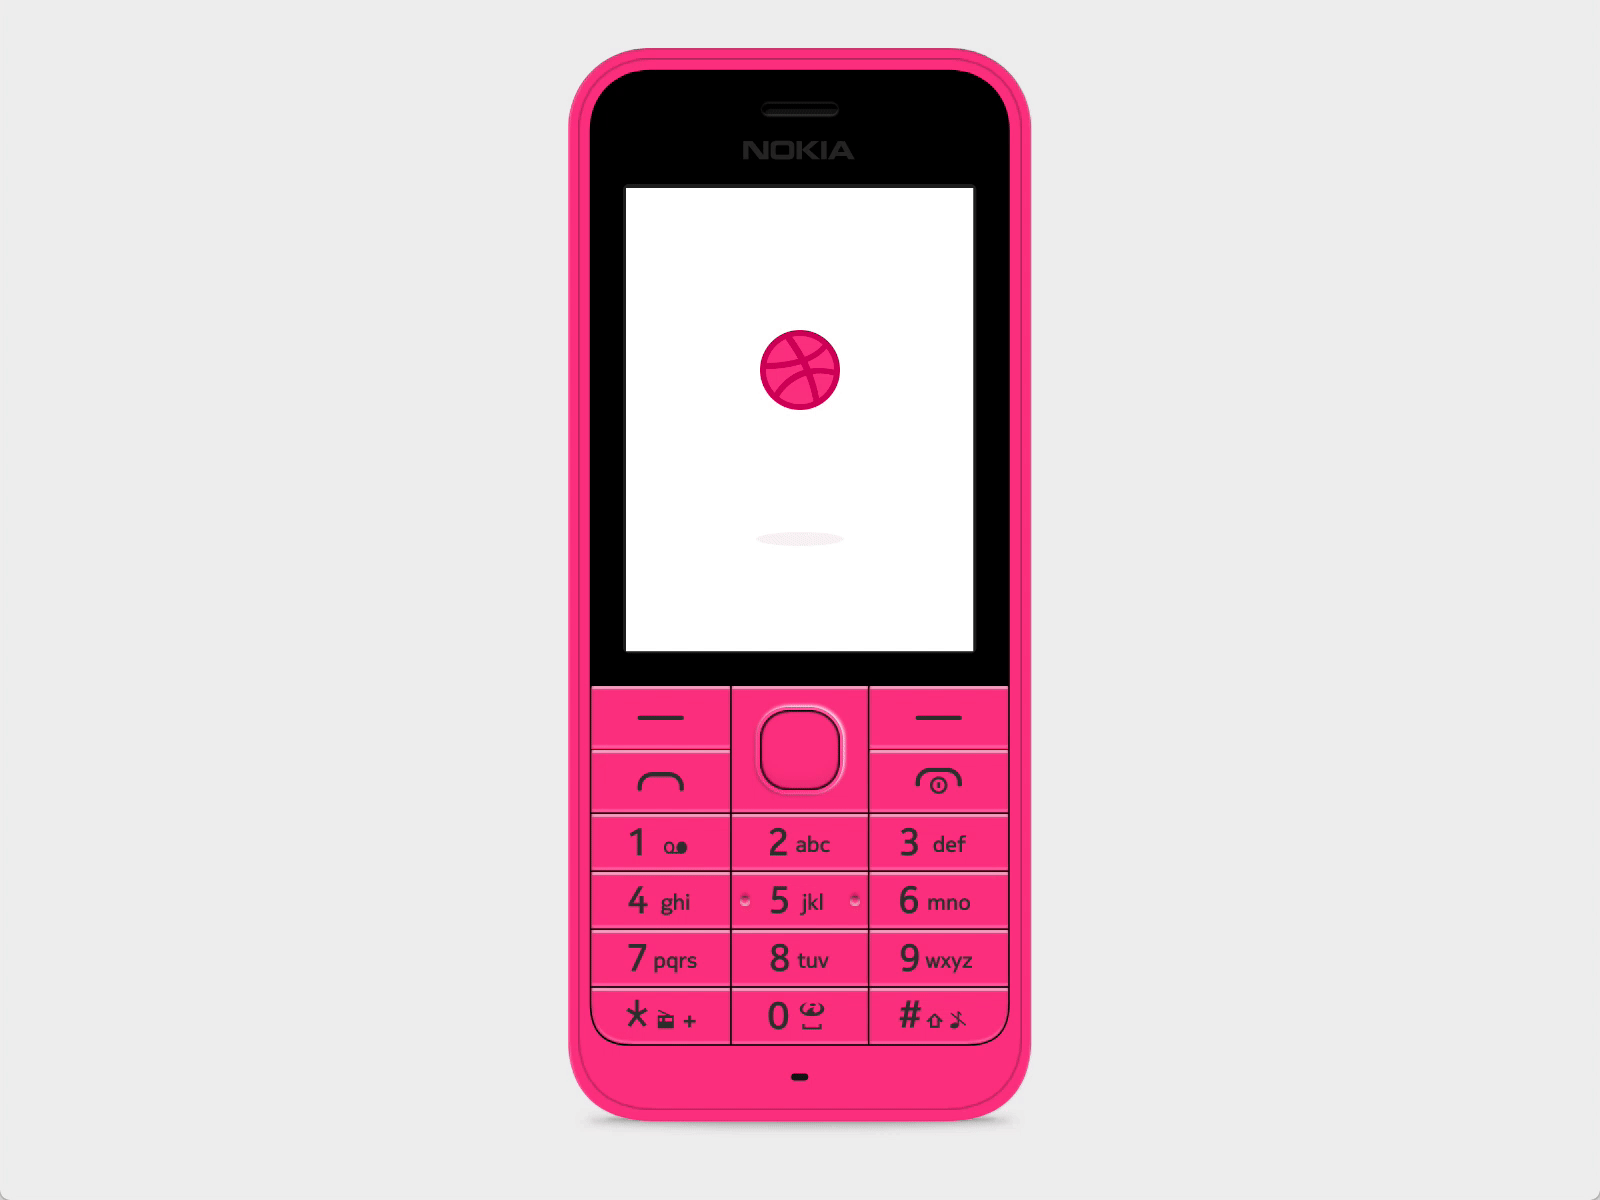 Greeting from Me and Nokia 220, Hello Dribbble!